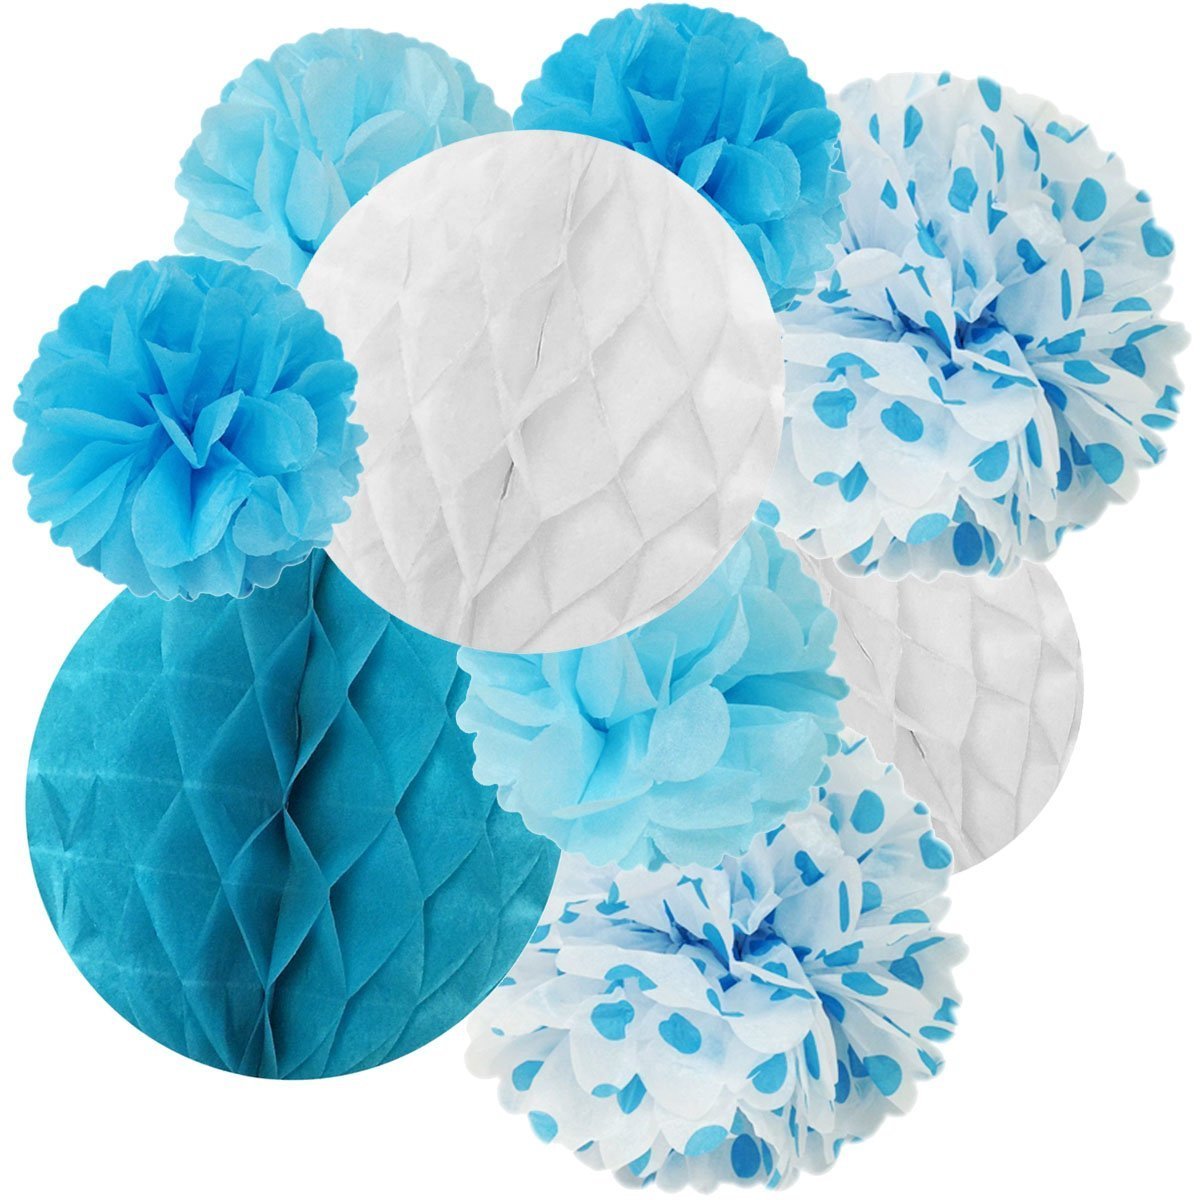 Wrapables Set of 21 Tissue Honeycomb Ball and Pom Pom Party Decorations for Weddings, Birthday Parties Baby Showers and Nursery Decor, Blue/ Light